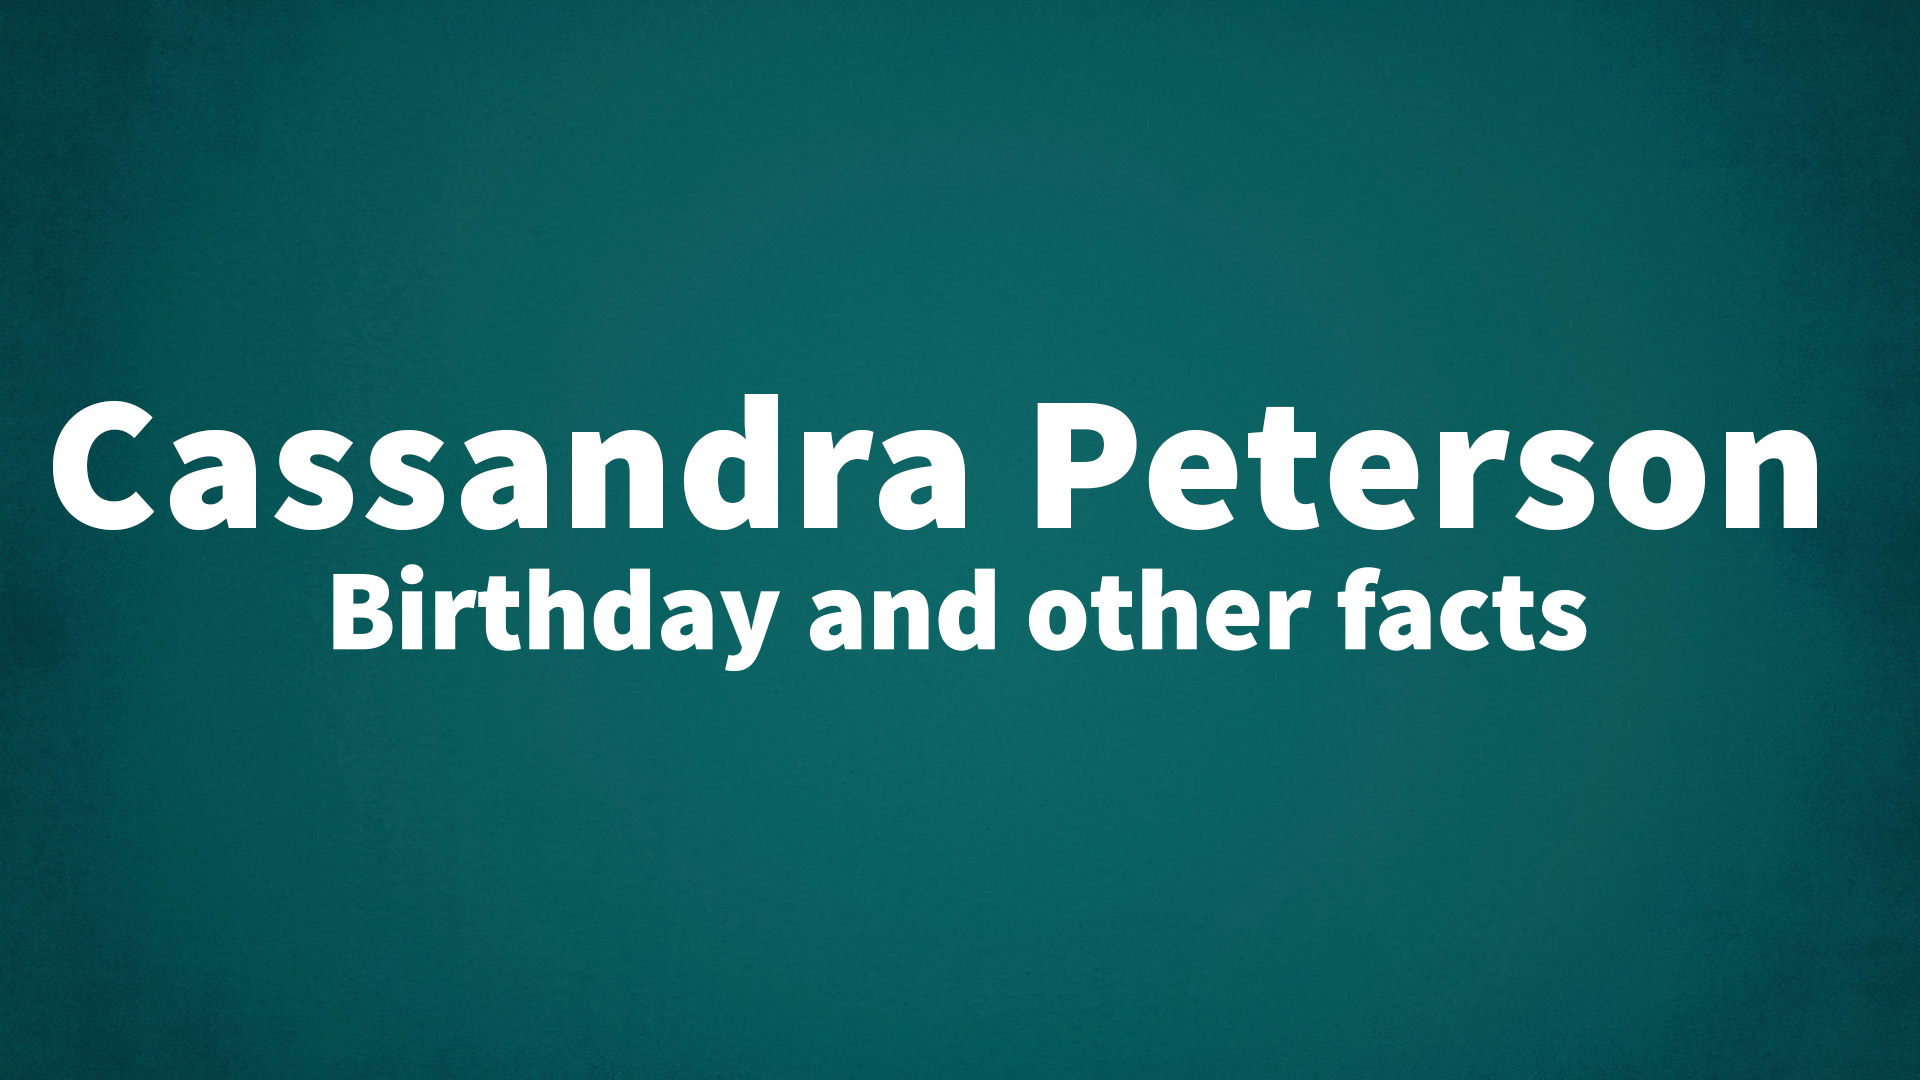 Cassandra Peterson Birthday and other facts